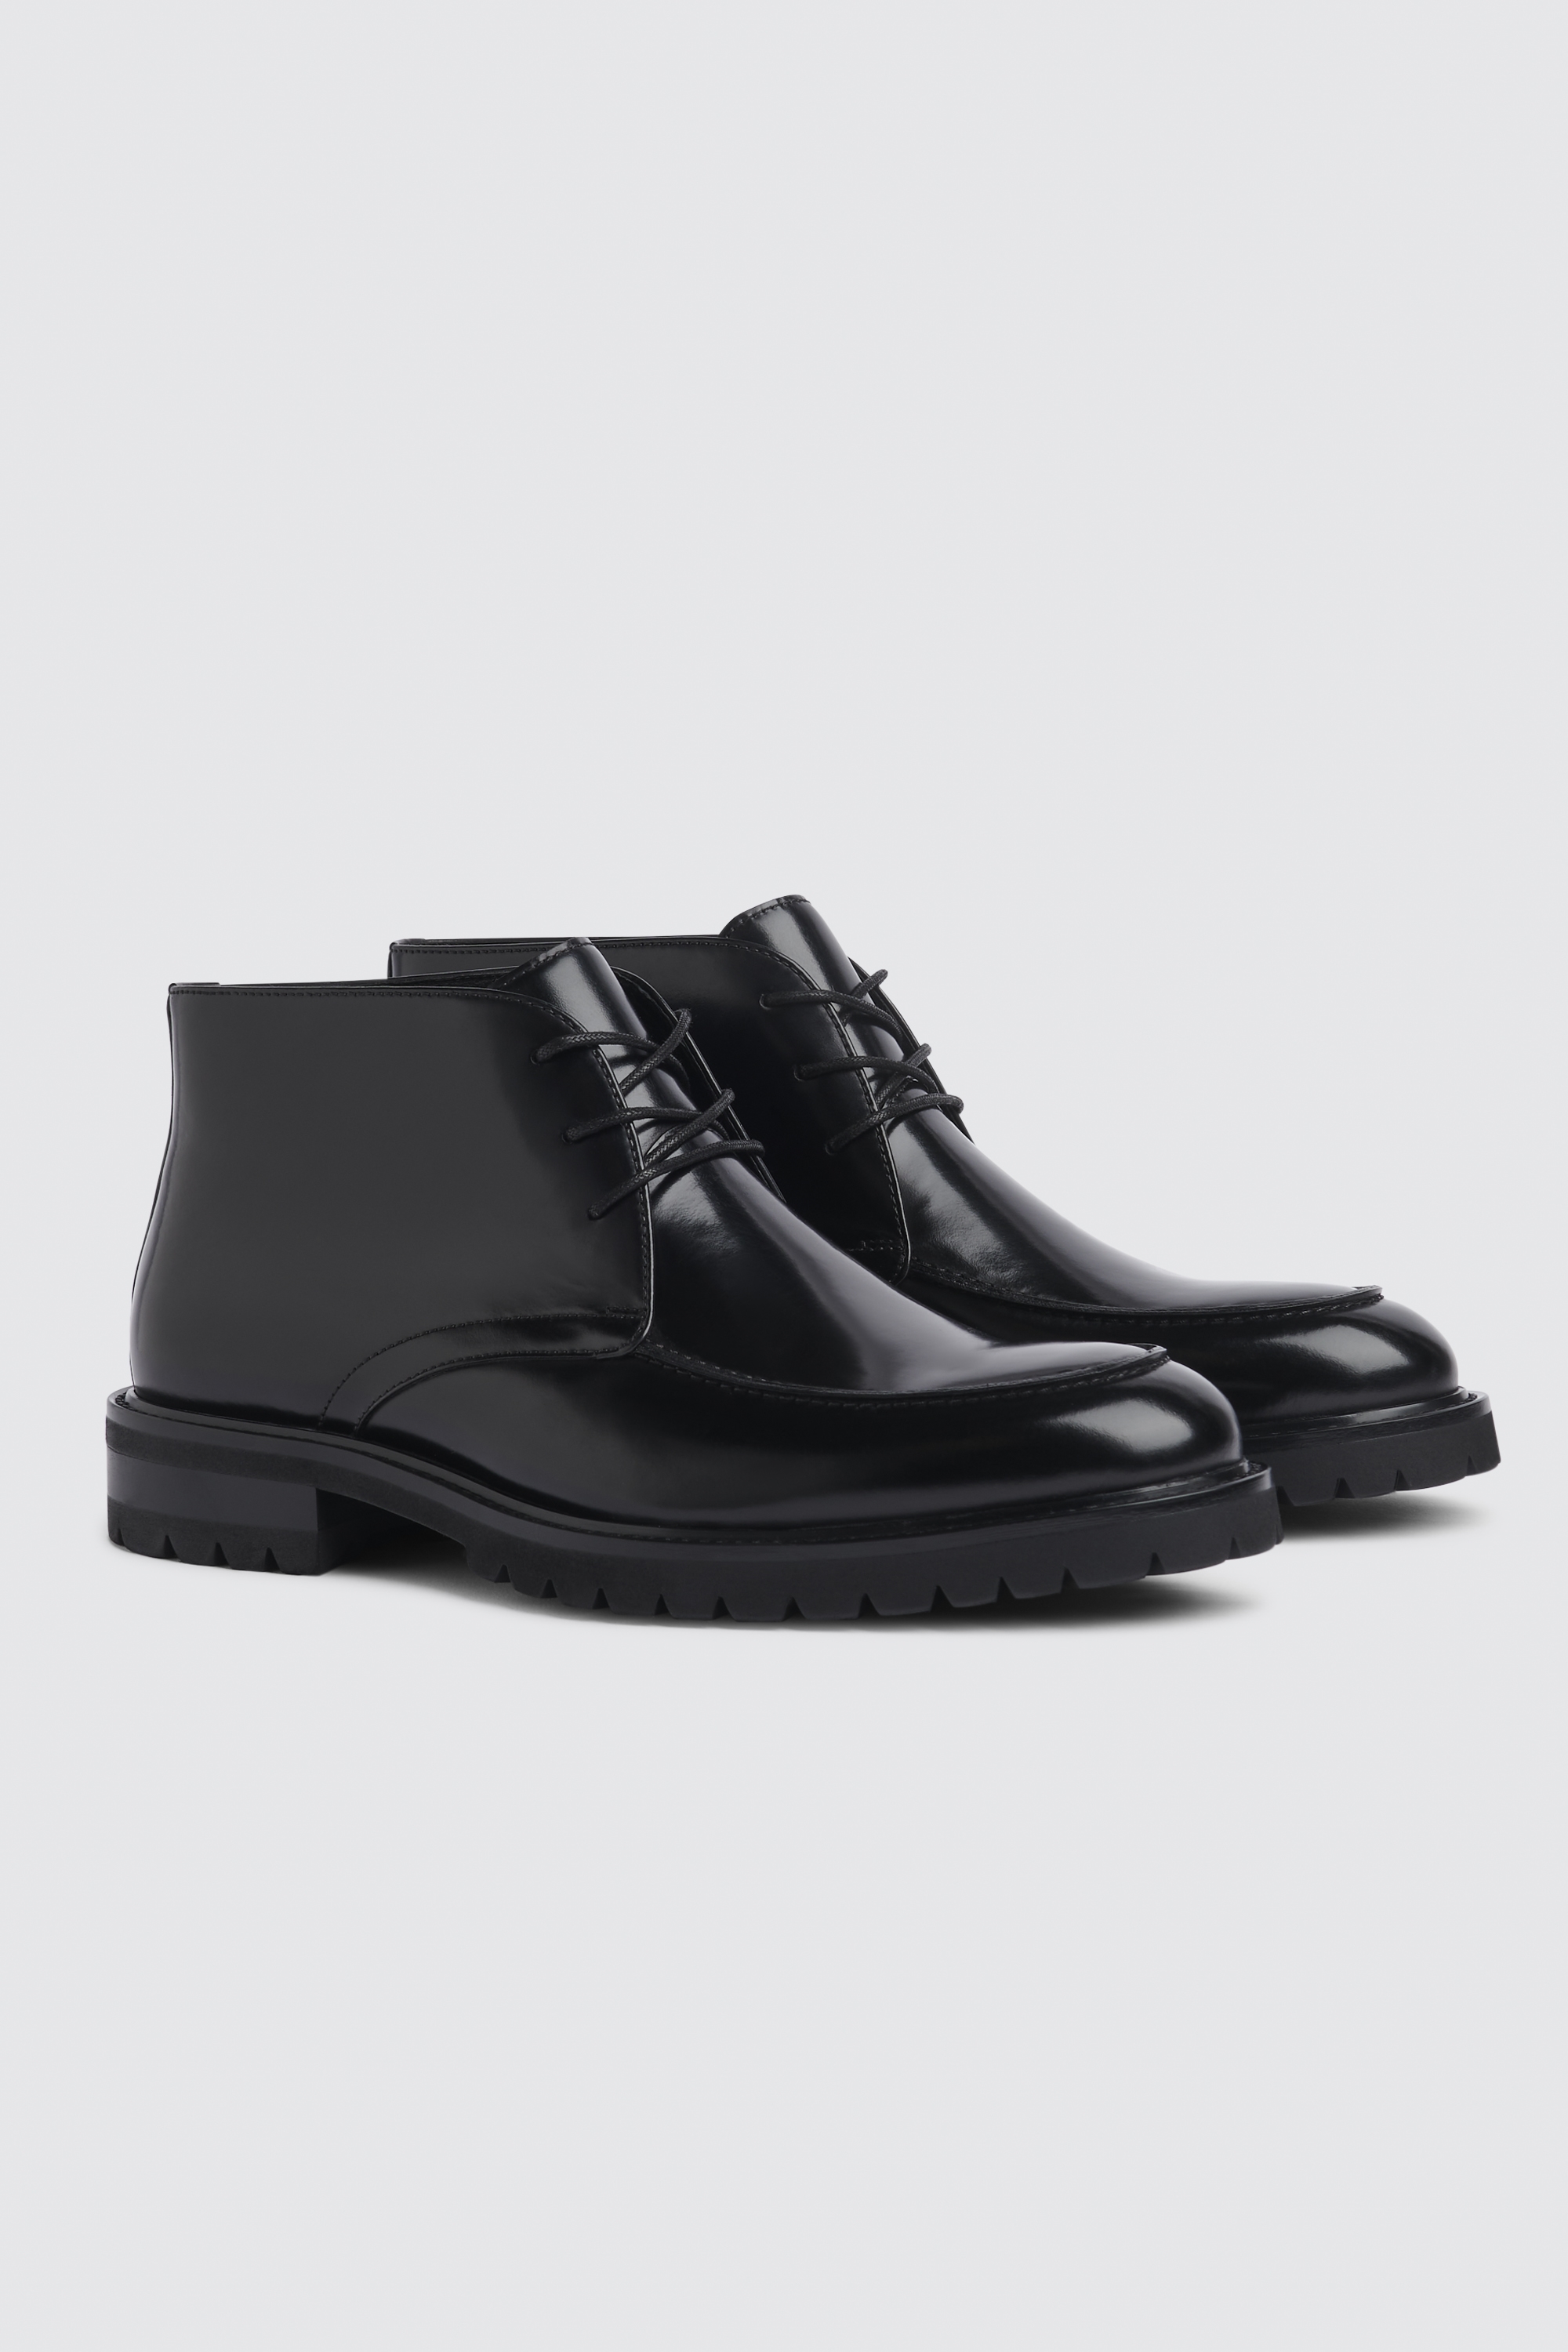 Addington Black Mid Height Boots | Buy Online at Moss